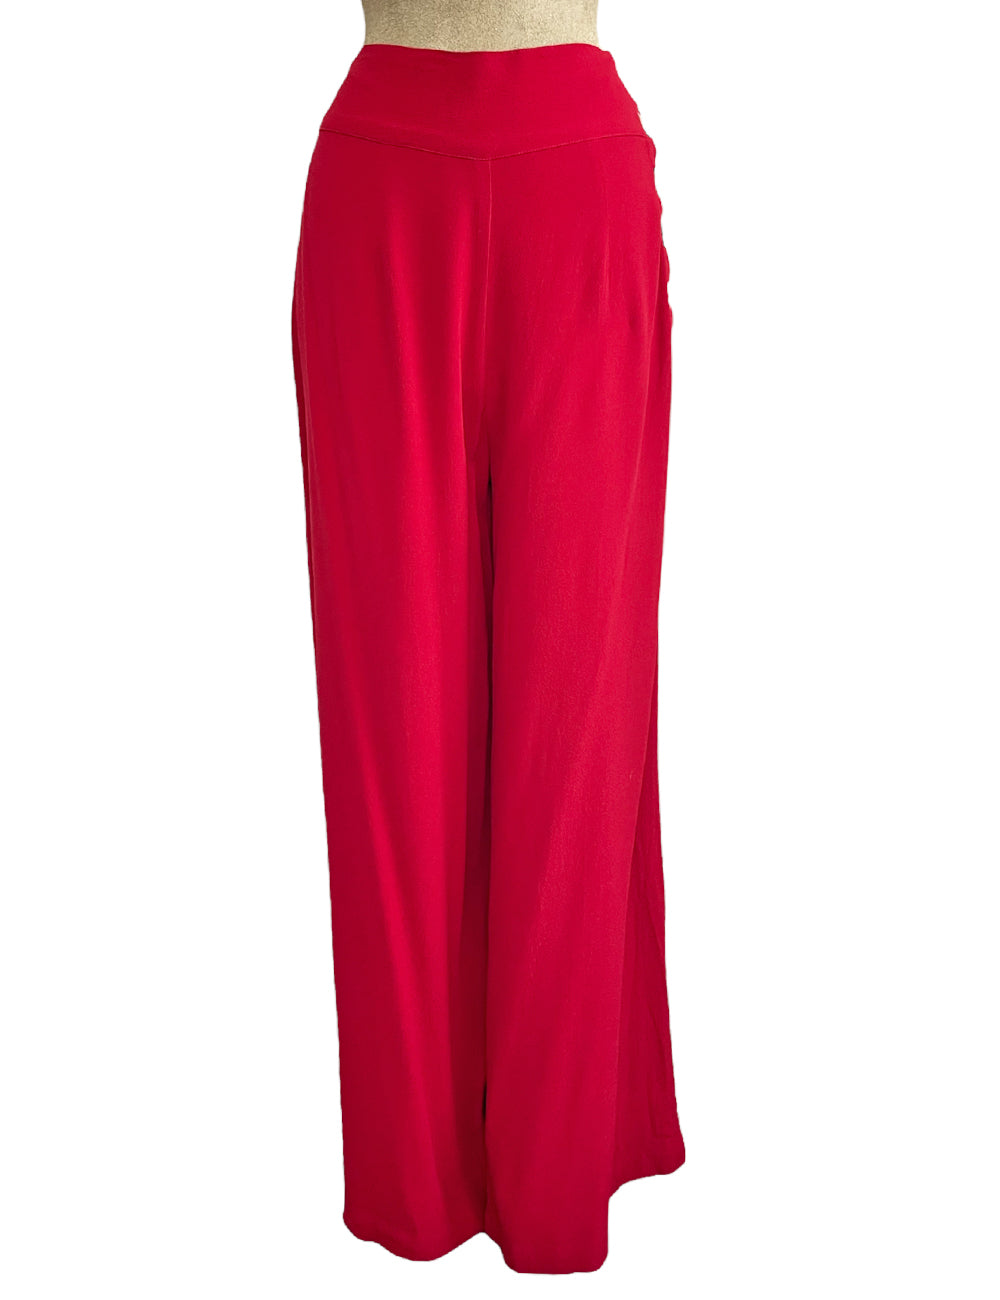 FINAL SALE - Cherry Red Heavy Crepe 1940s Style High Waisted Palazzo Pants